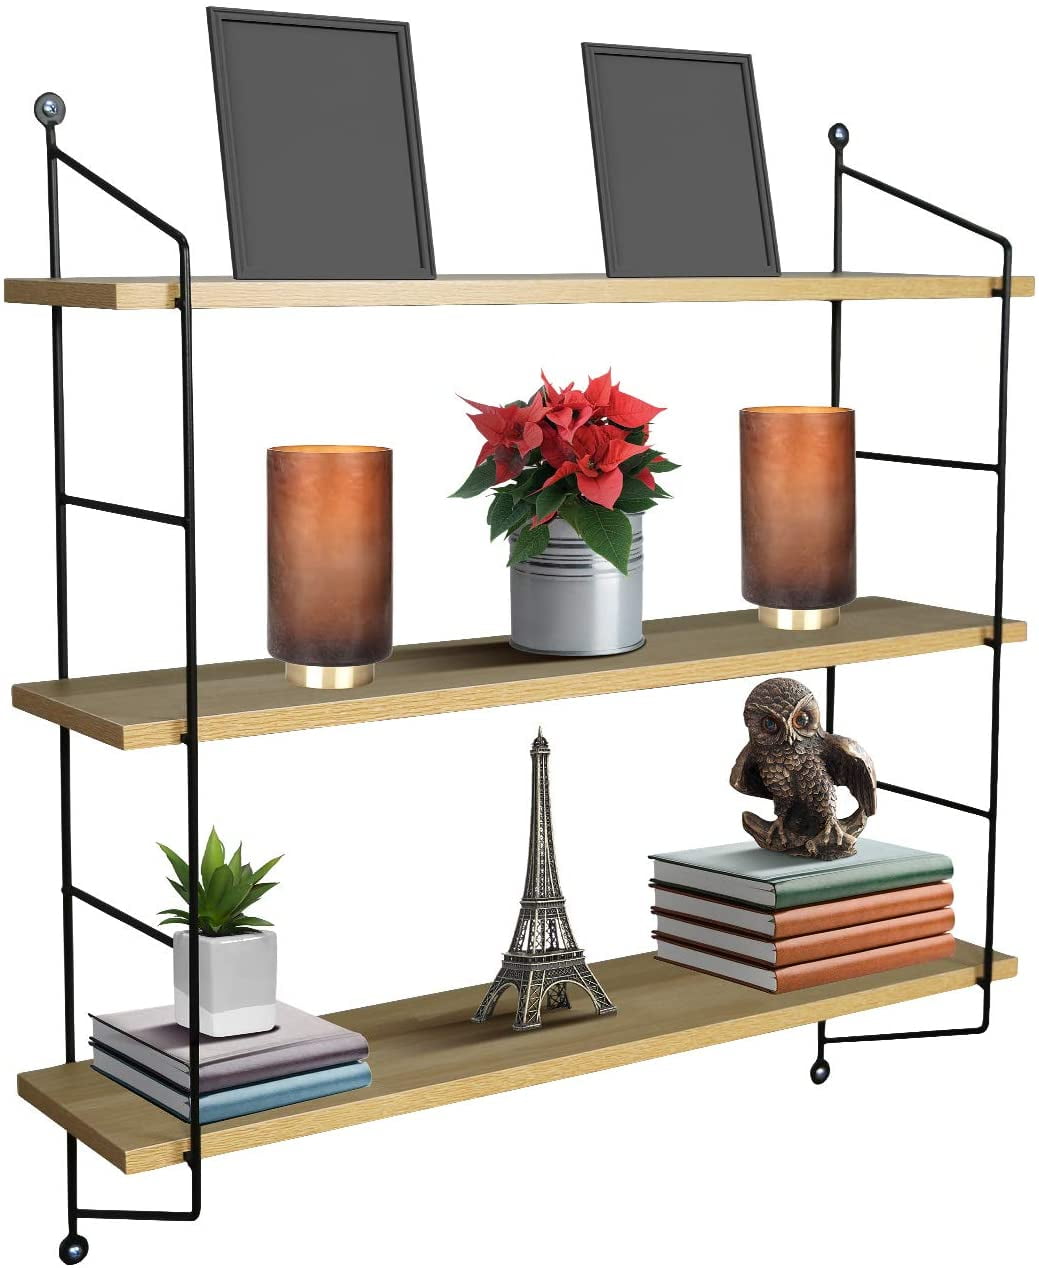 Storage & Decor 2-Tier Wall Mounted Rustic Floating Wall Shelves for Display 